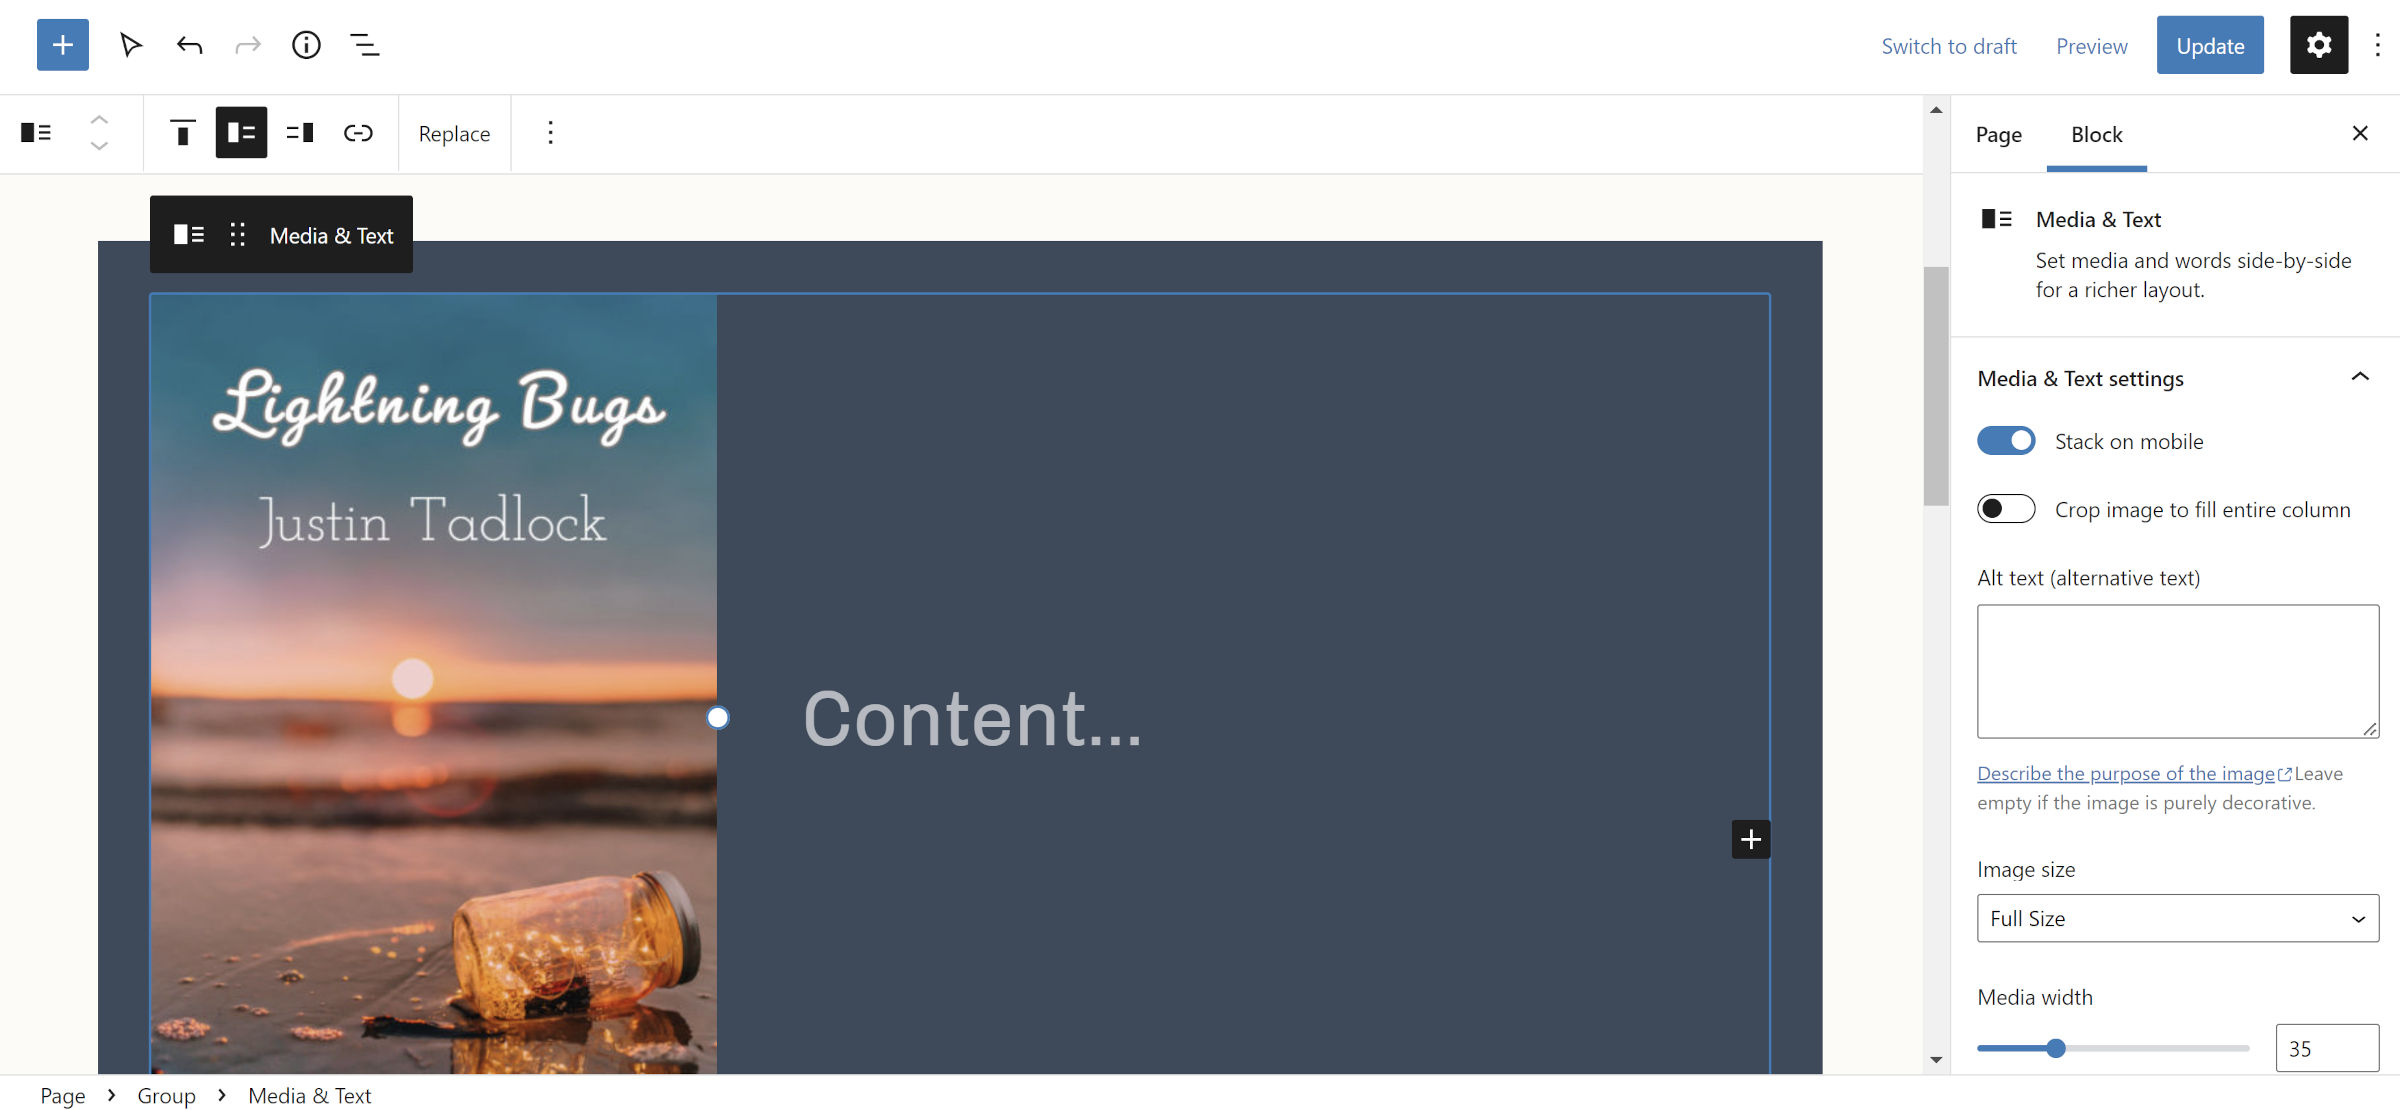 WordPress post editor with a Media and text block.  It shows a book cover image on the left.